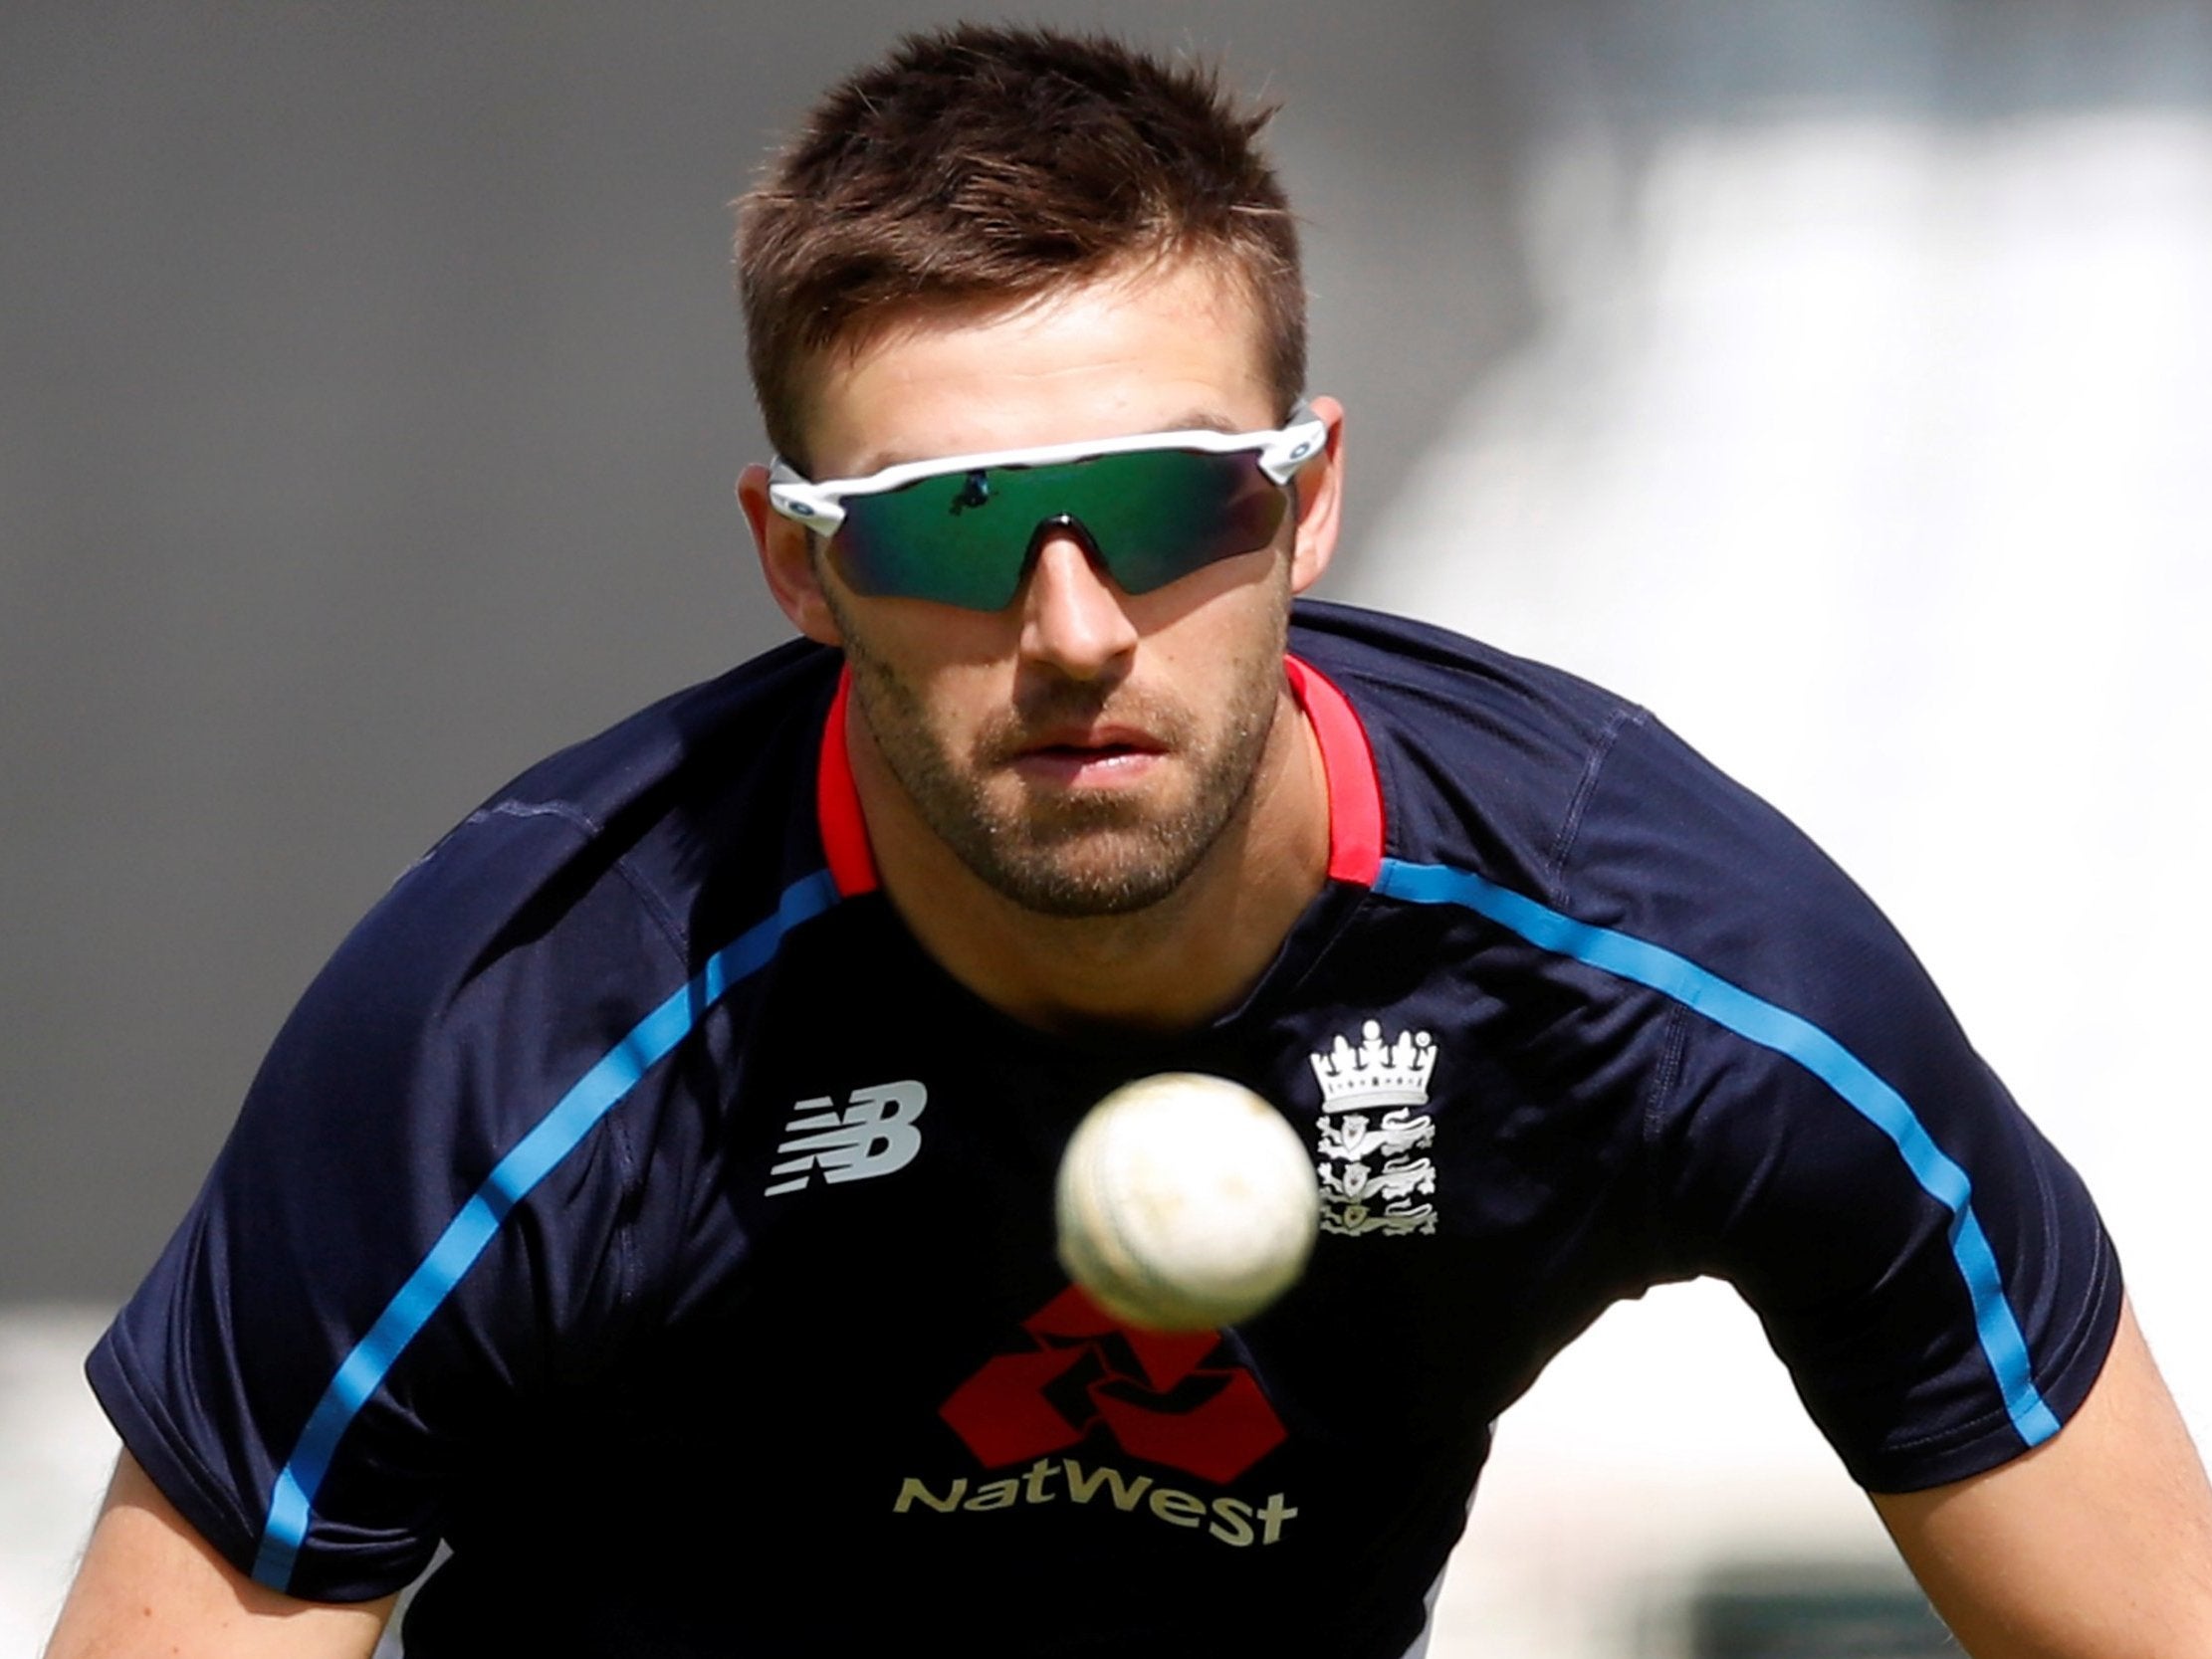 Mark Wood will make his return in the fourth ODI against Pakistan